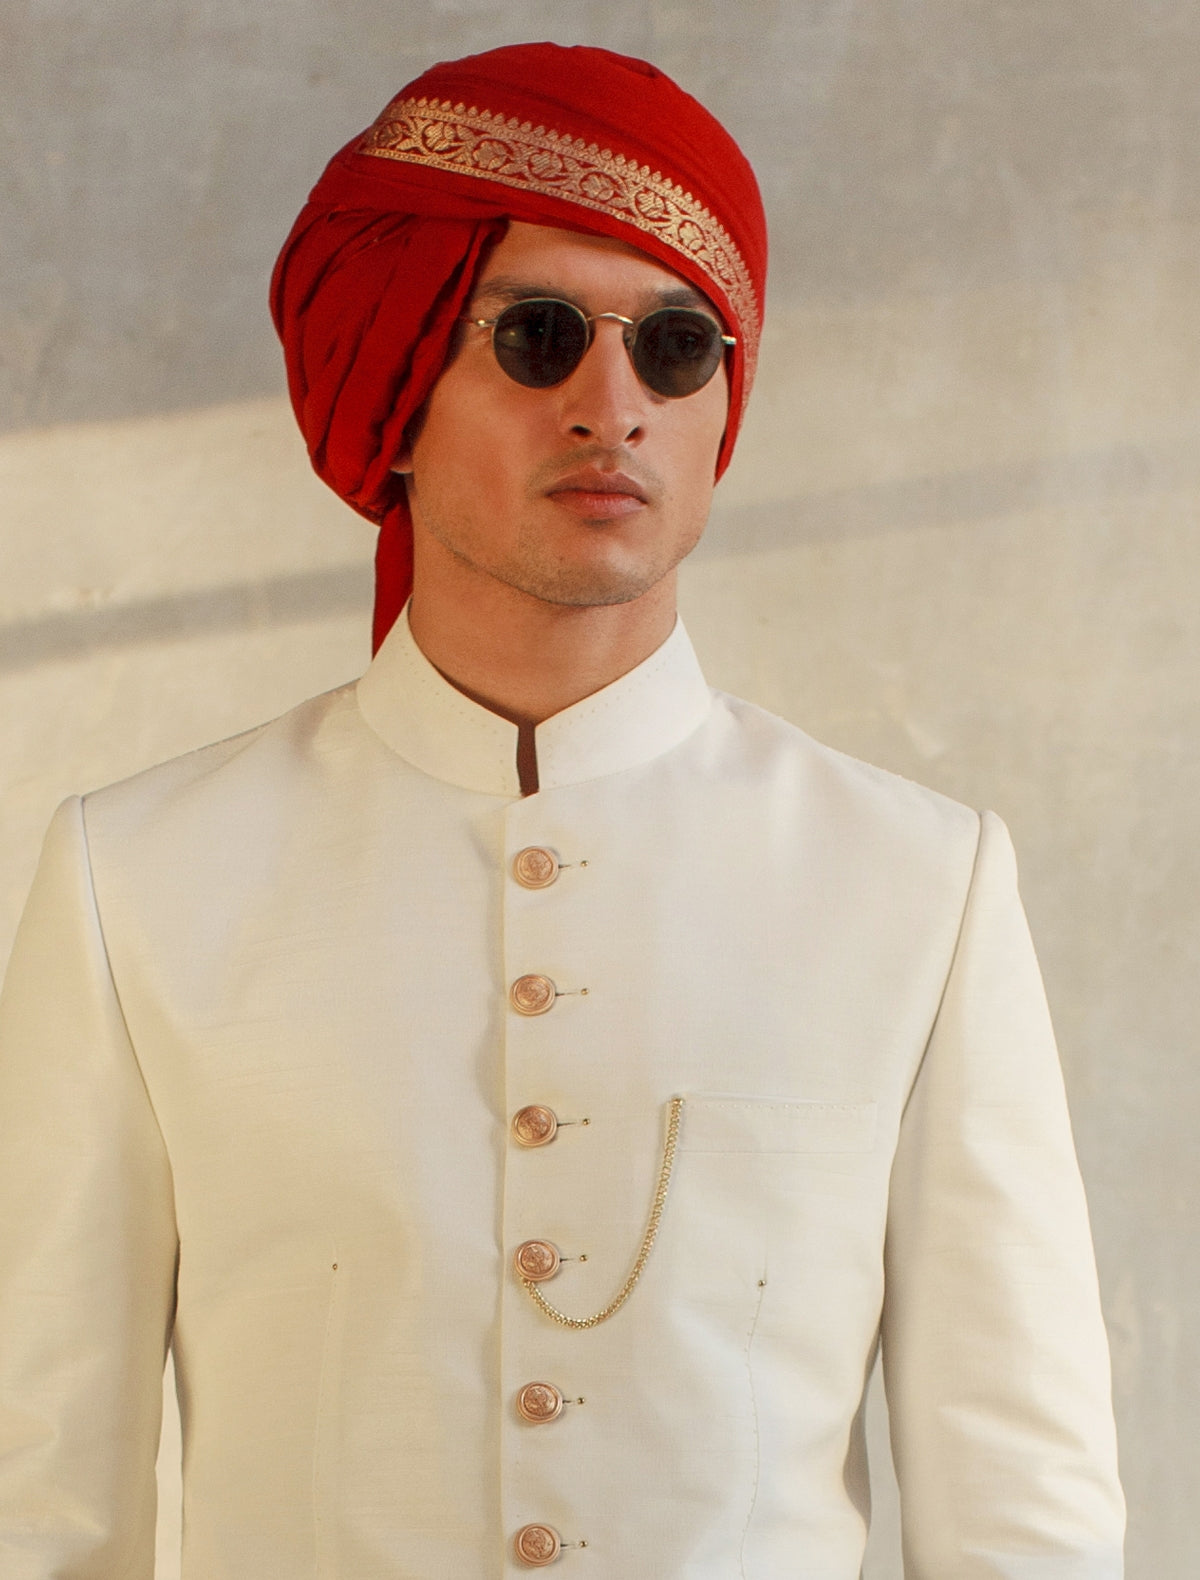 REDDISH MAROON TURBAN WITH GOLDEN BOARDER AND SHORT TAIL